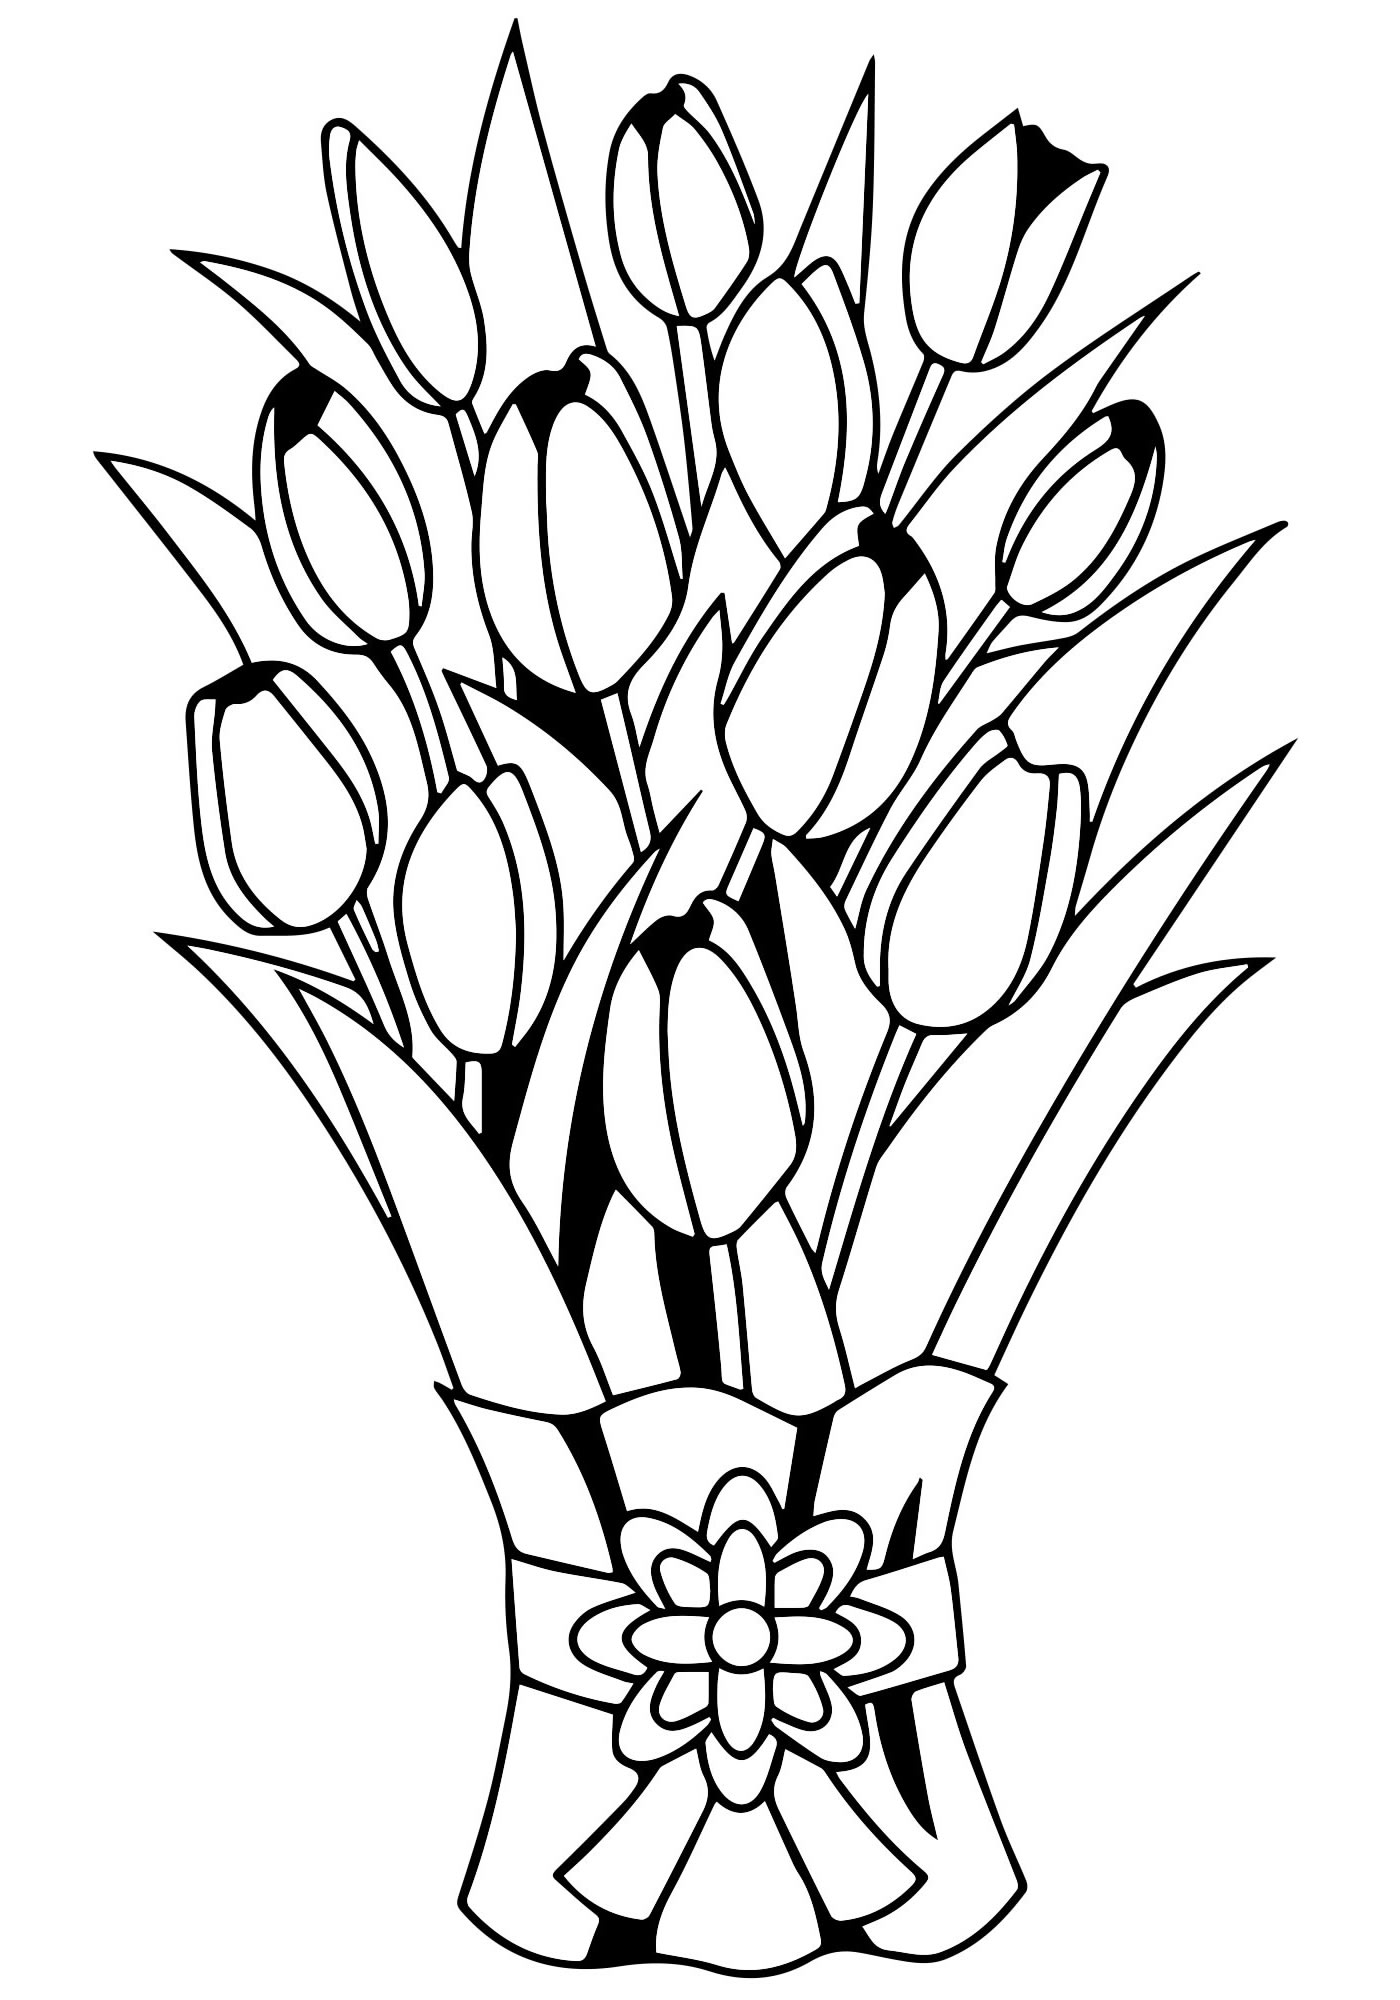 Sparkling tulips coloring book for children 3-4 years old